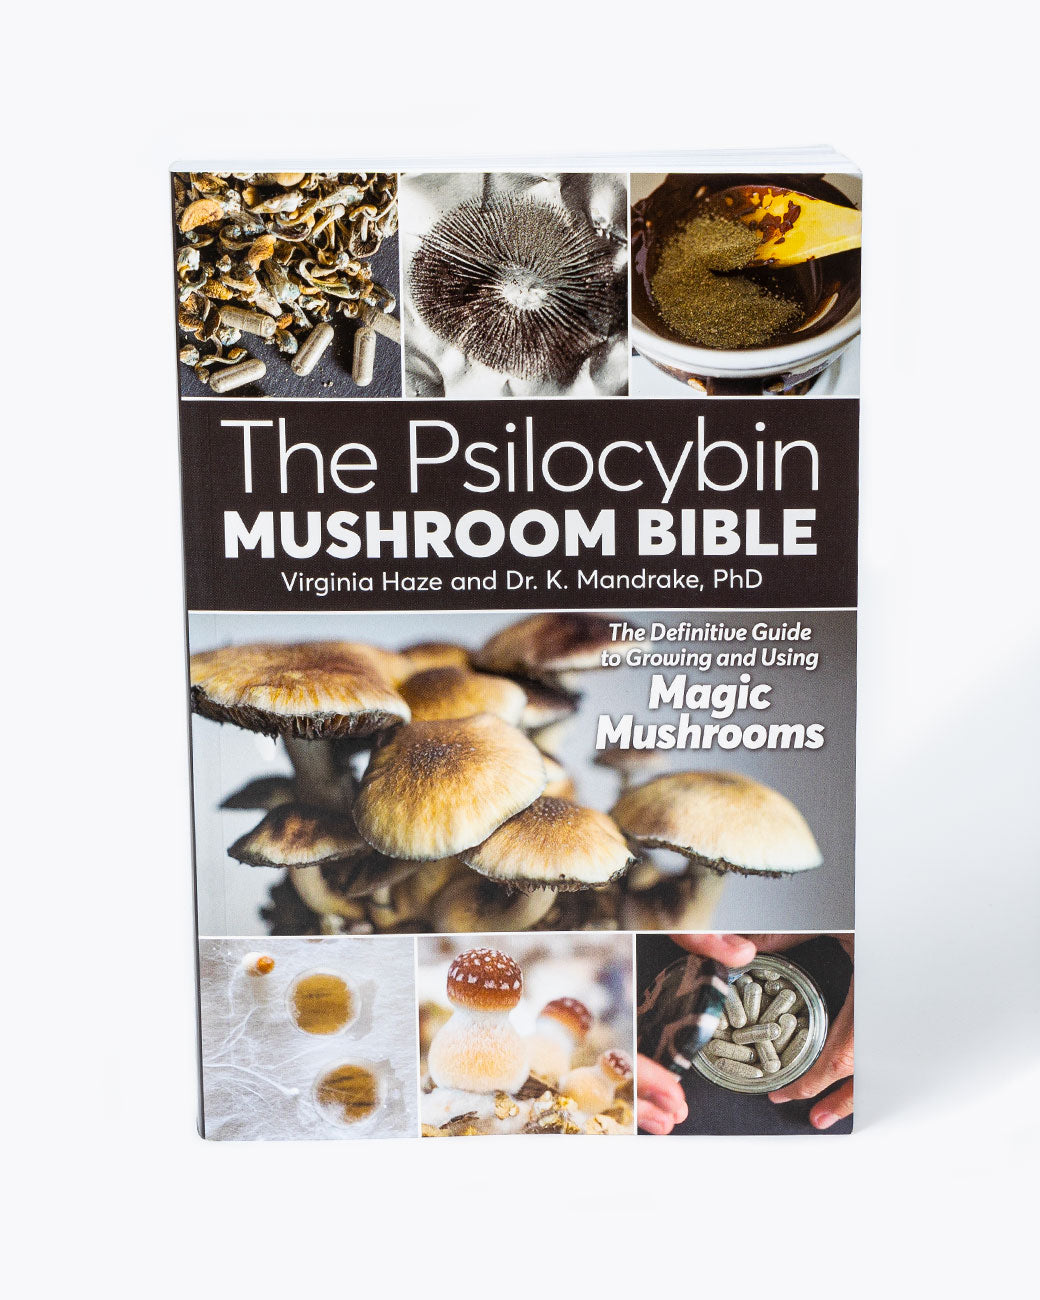 Front cover of The Psilocybin Mushroom Bible book.